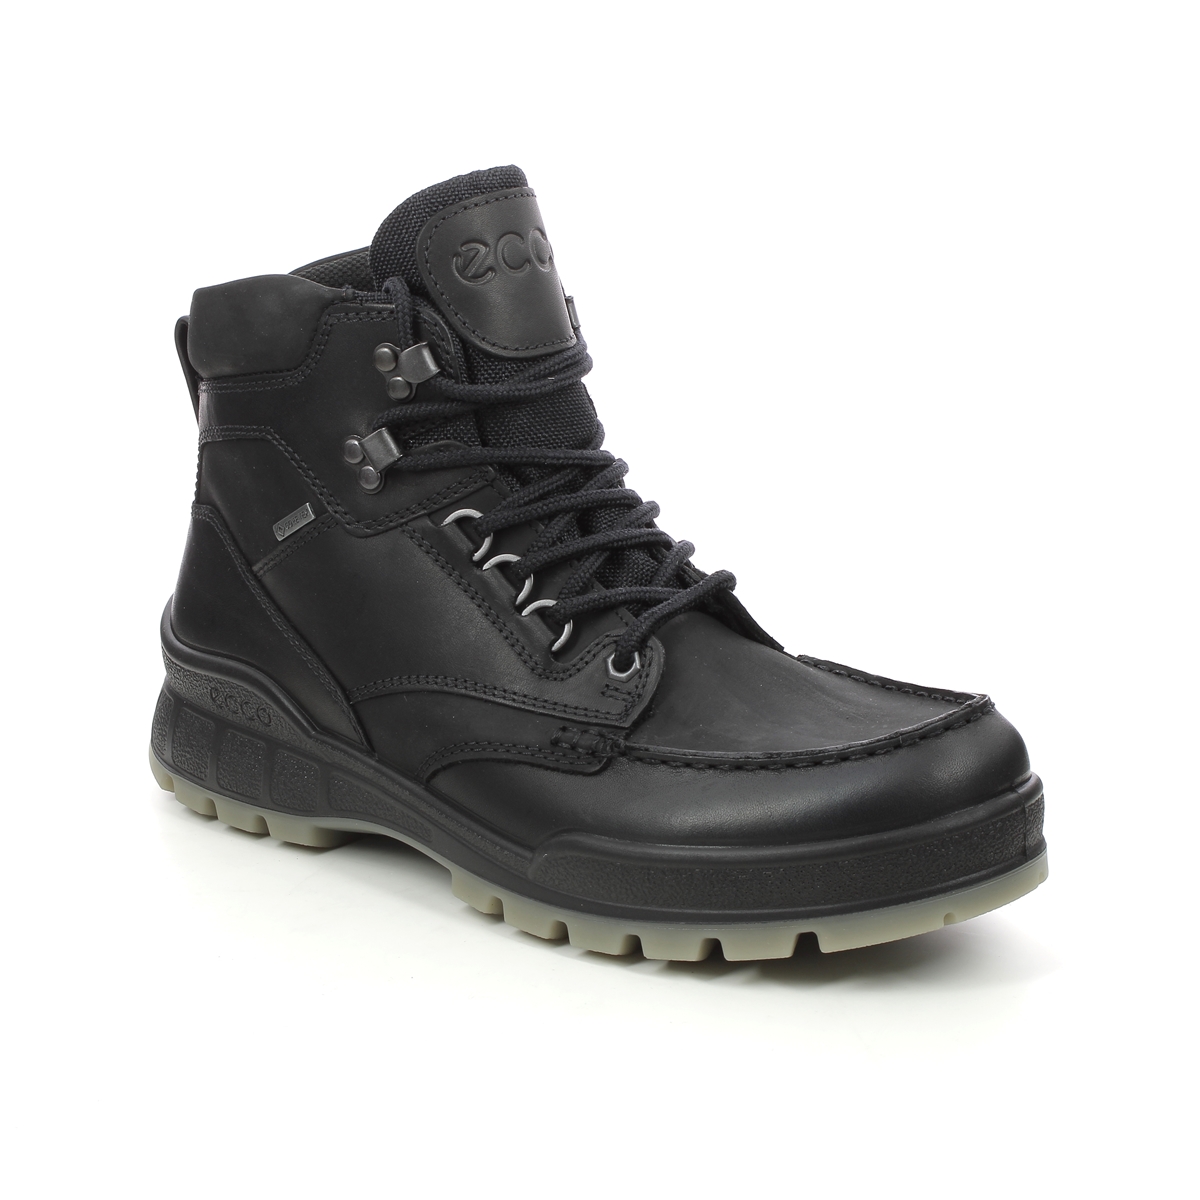 Ecco Track 25 Boot Gtx Black Leather Mens Outdoor Walking Boots 831704-51052 In Size 45 In Plain Black Leather